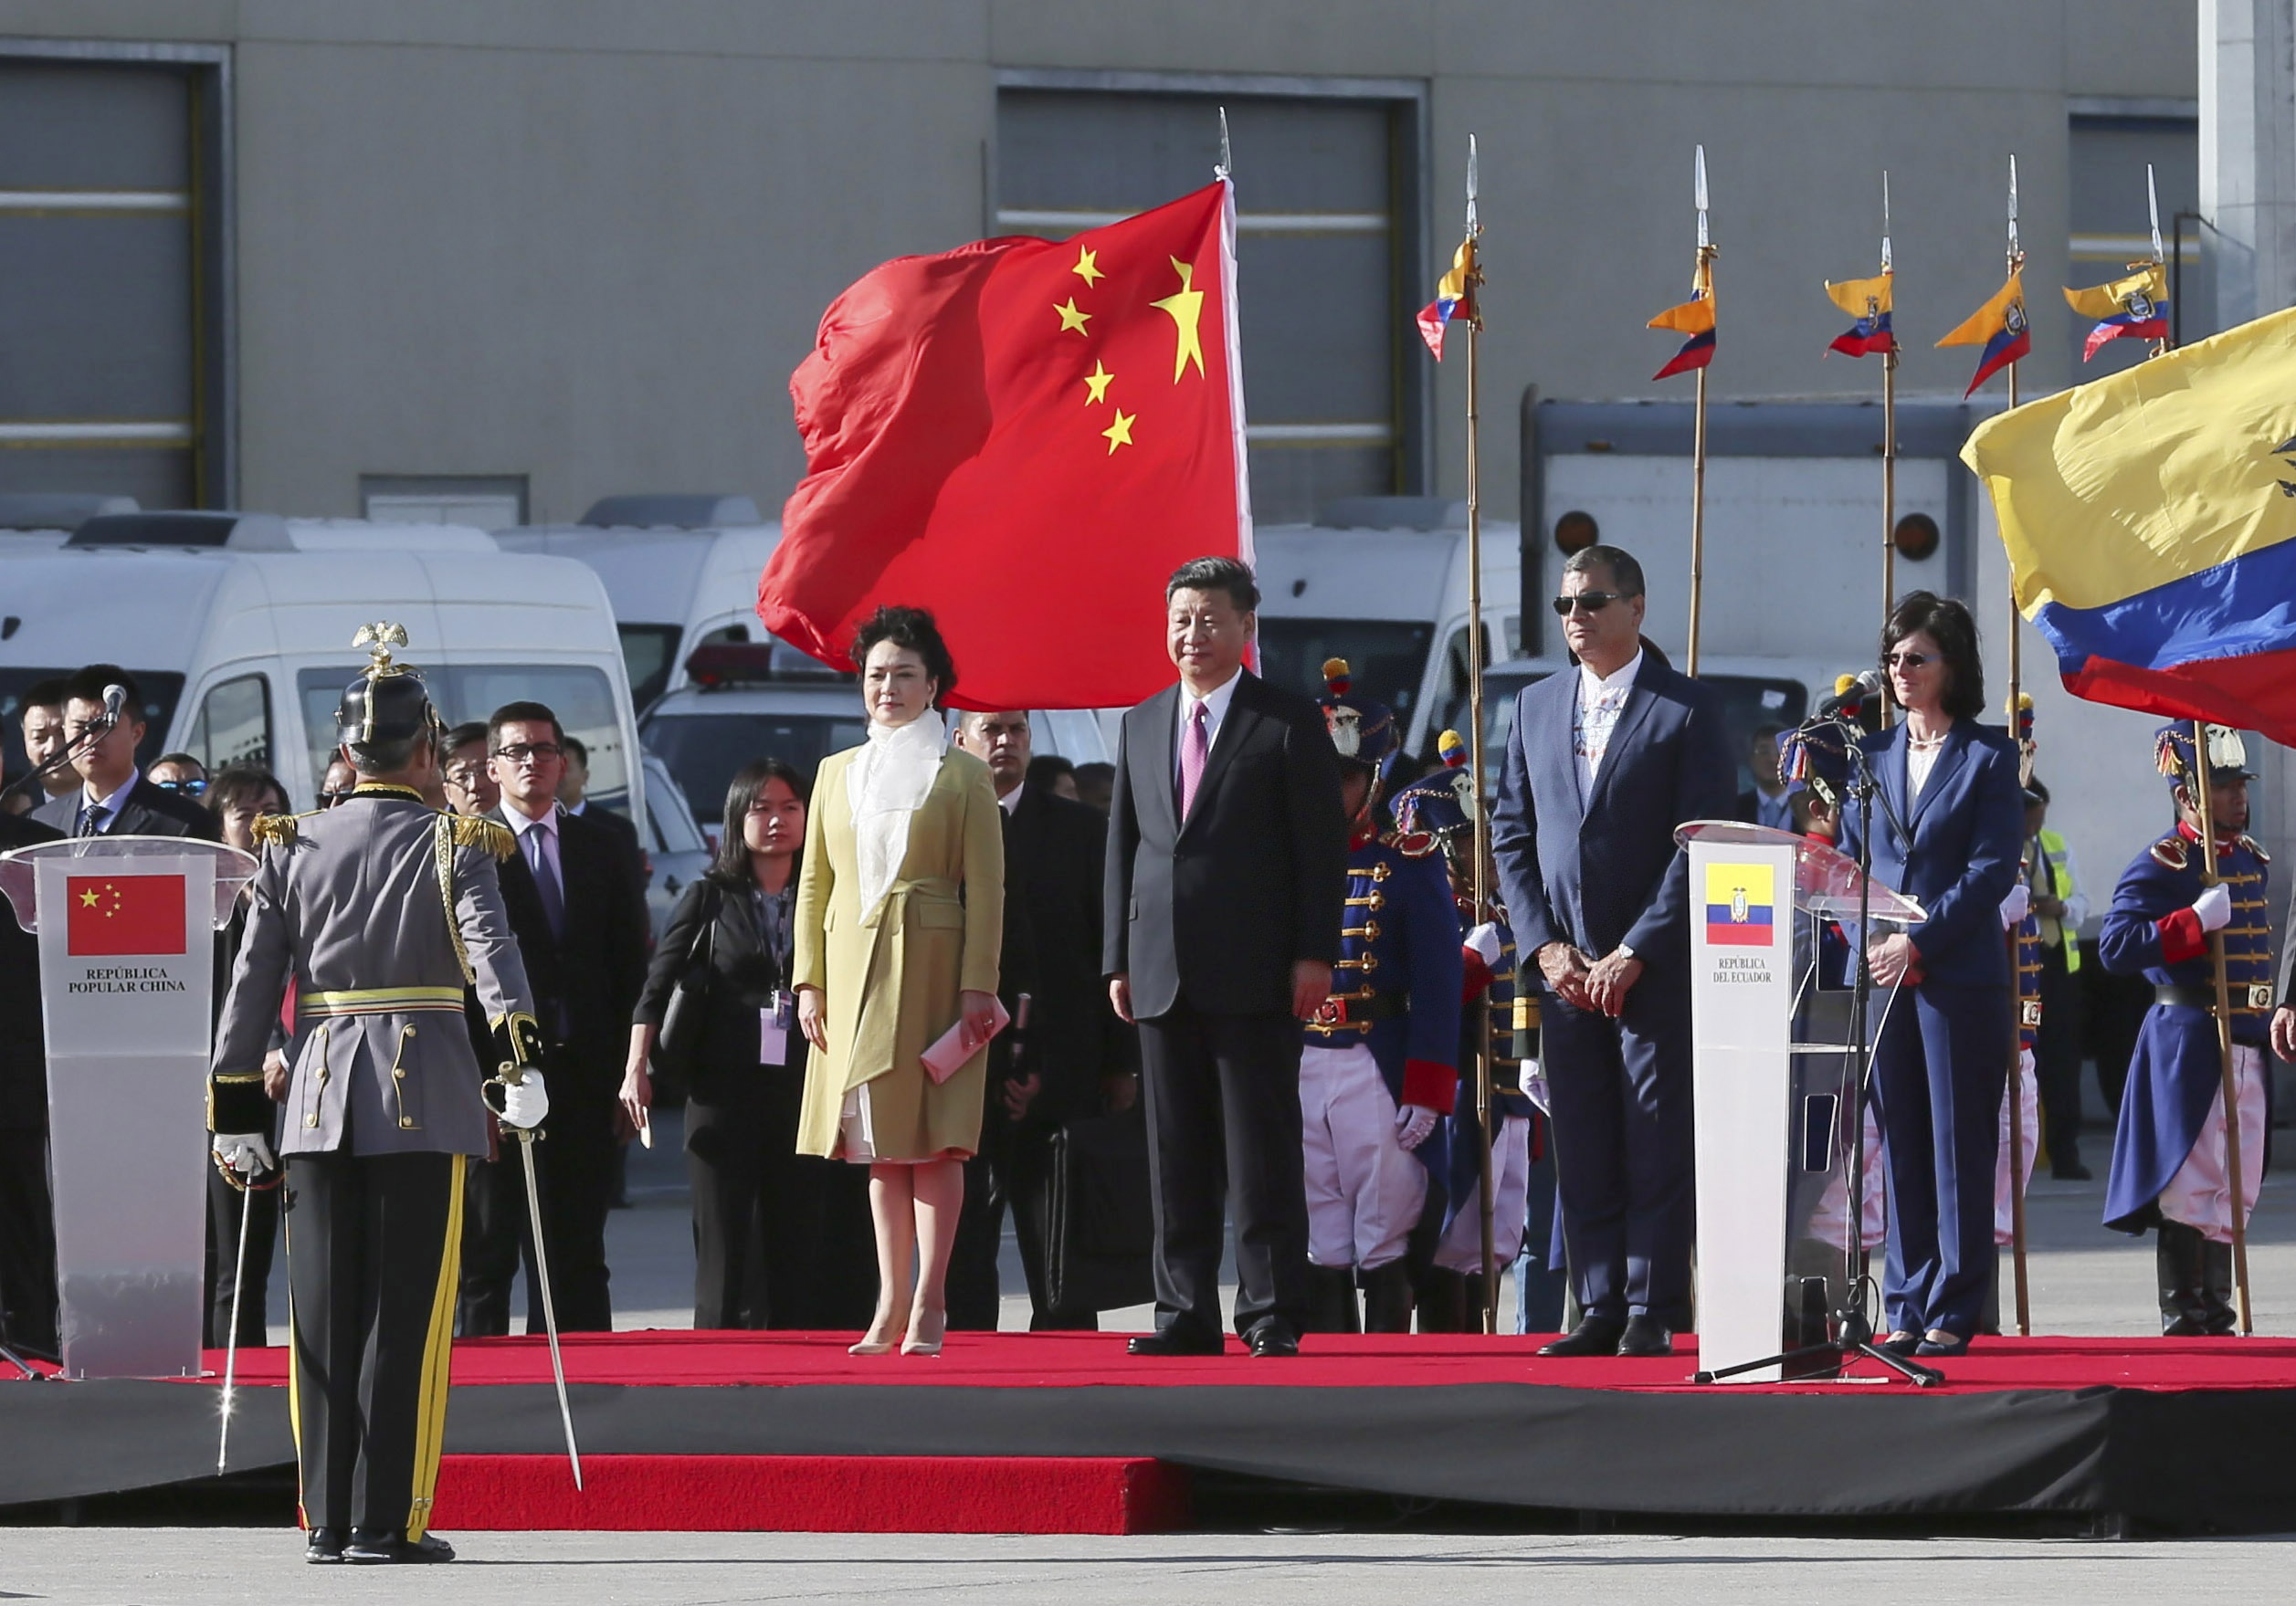 Chinese President Xi Jinping attends a welcome ceremony held by Ecuadorian President Rafael Correa at the airport in Quito, Ecuador, Nov. 17, 2016.